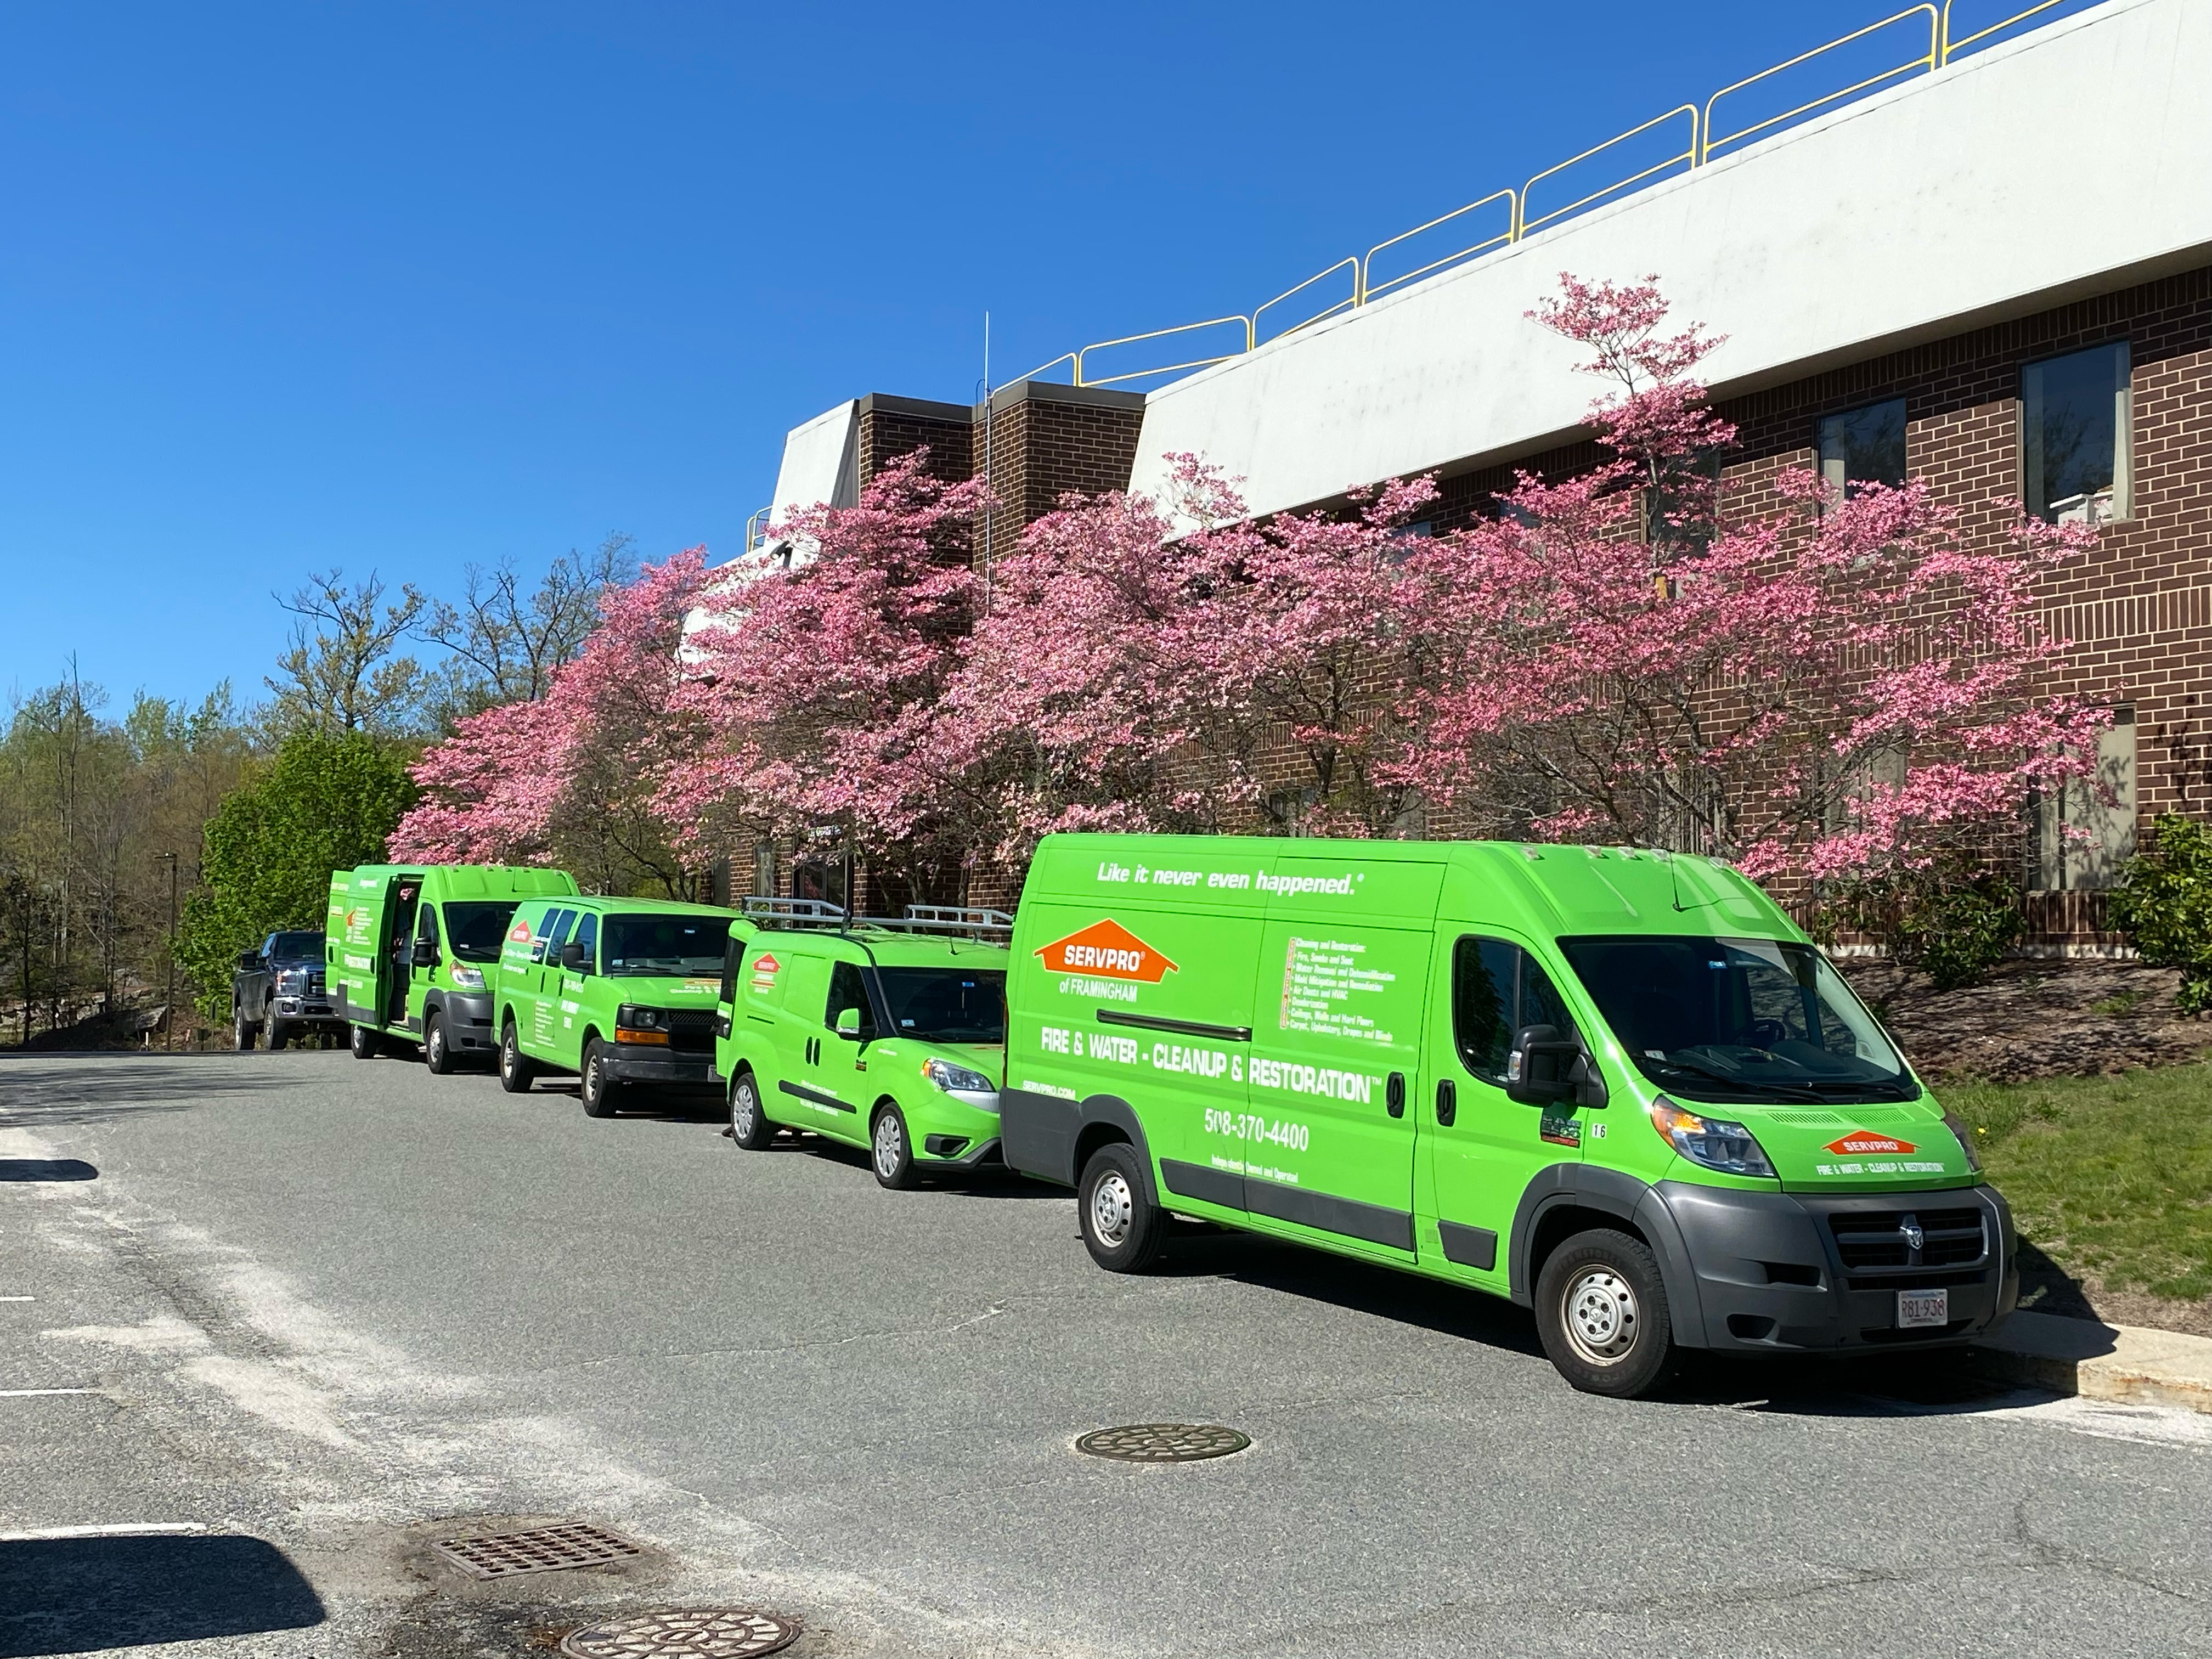 When disaster strikes your residential or commercial property you need experts to guide you through the process of making it "Like it never even happened." SERVPRO of Foxborough does exactly that not only for the Foxborough community but also the surrounding communities of Franklin, Millis, Wrentham, Bellingham, Walpole, Norfolk.